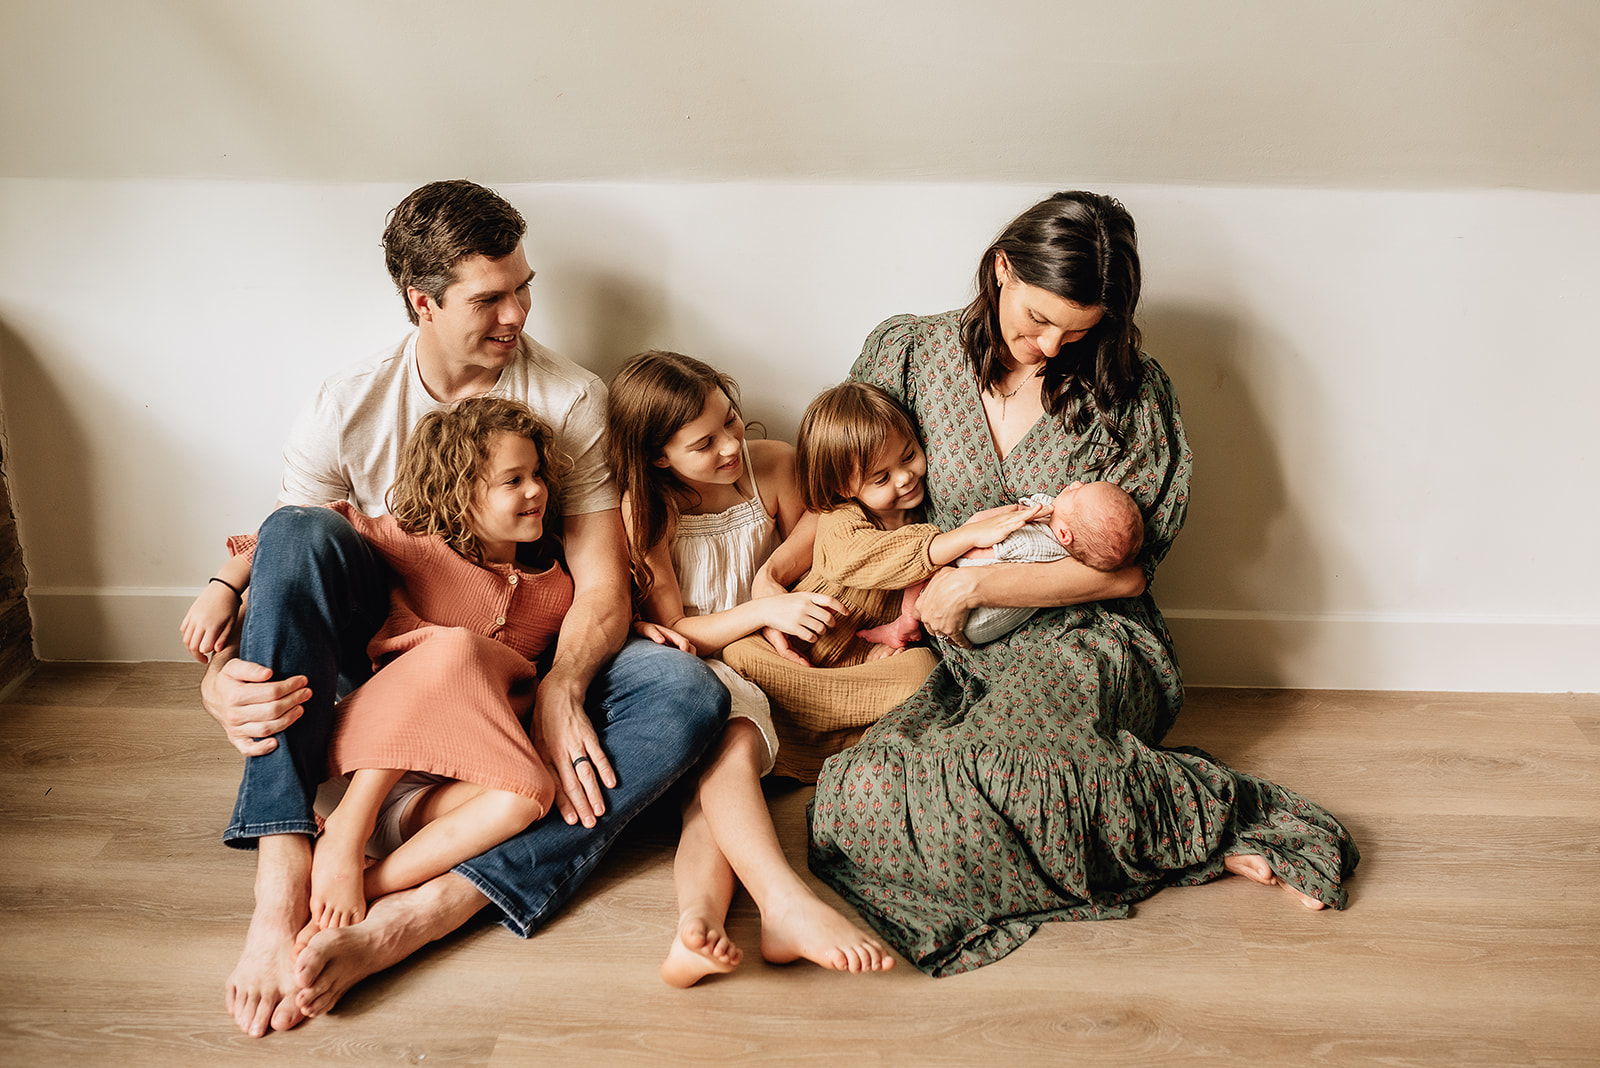 A family of six sits on the floor looking down on and touching their newest member in mom's arms